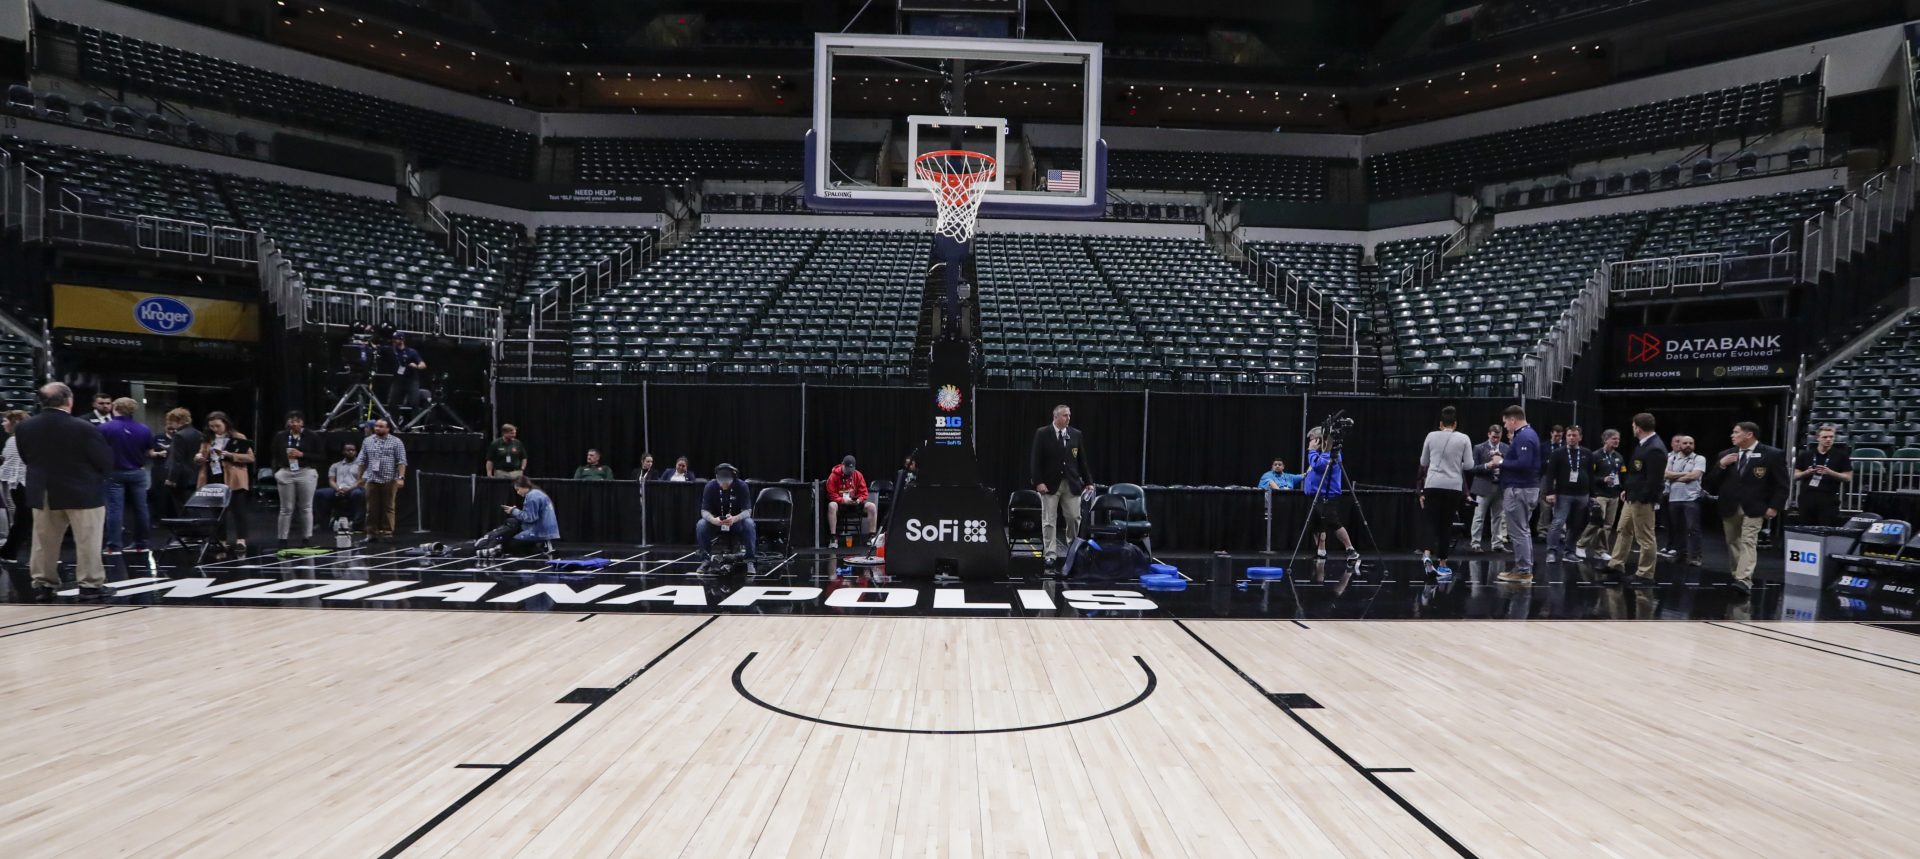 The seating area at Bankers Life Fieldhouse is empty as media and staff mill about, Thursday, March 12, 2020, in Indianapolis, after the Big Ten Conference announced that remainder of the men's NCAA college basketball games tournament was cancelled.